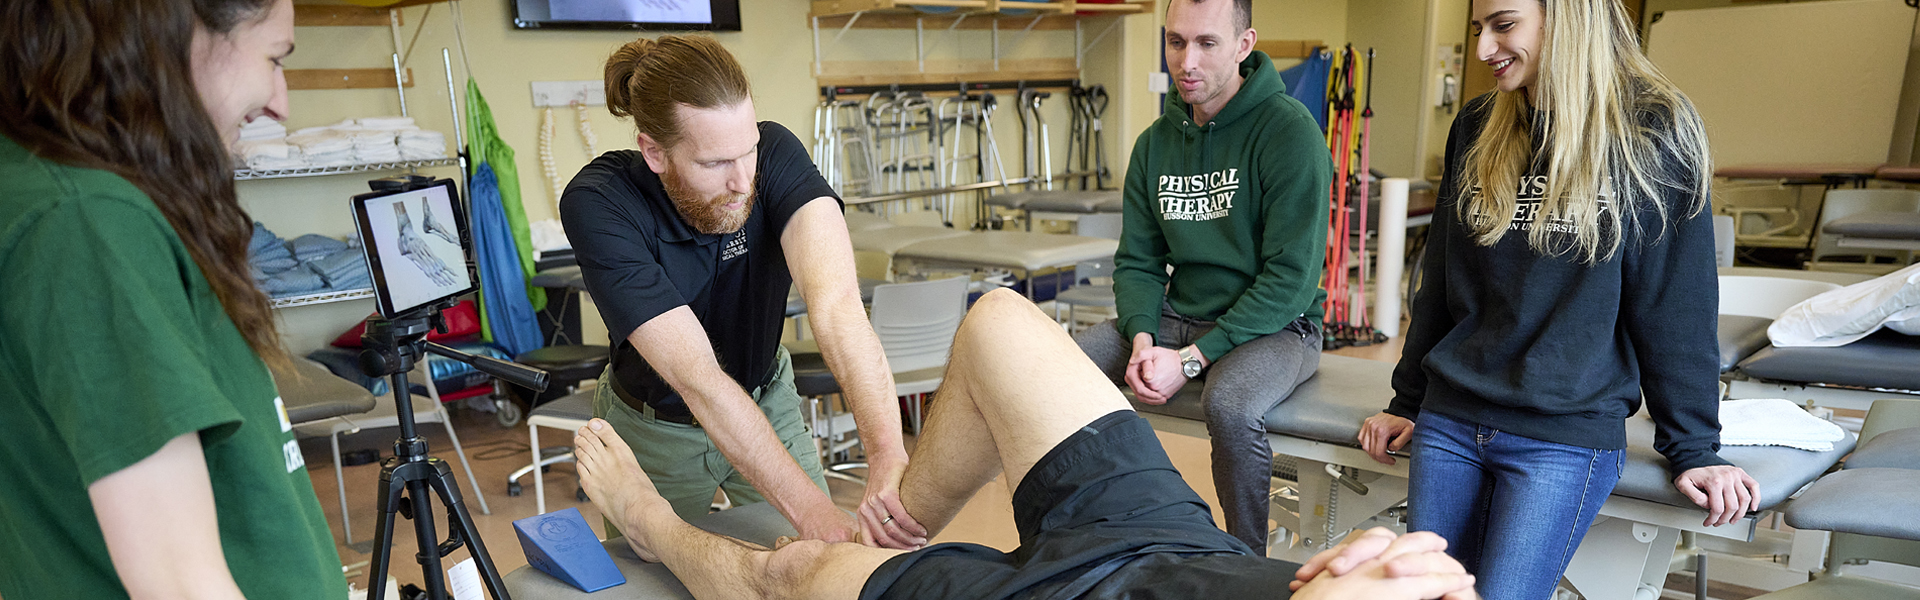 Students and faculty work in a Physical Therapy Simulation Lab